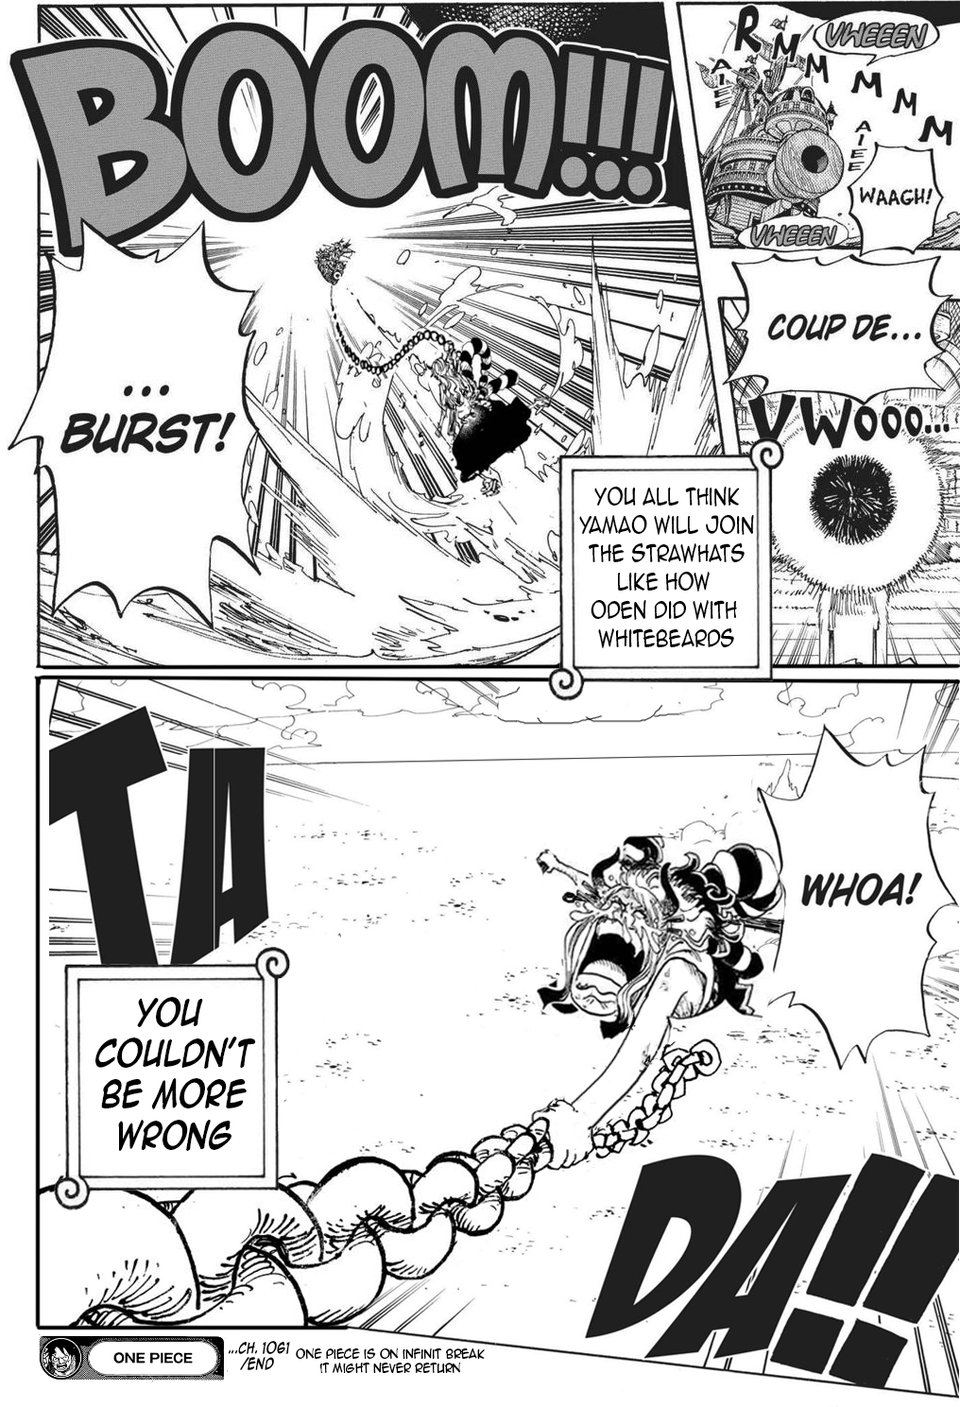 Spoiler - One Piece Chapter 1056 Spoilers Discussion